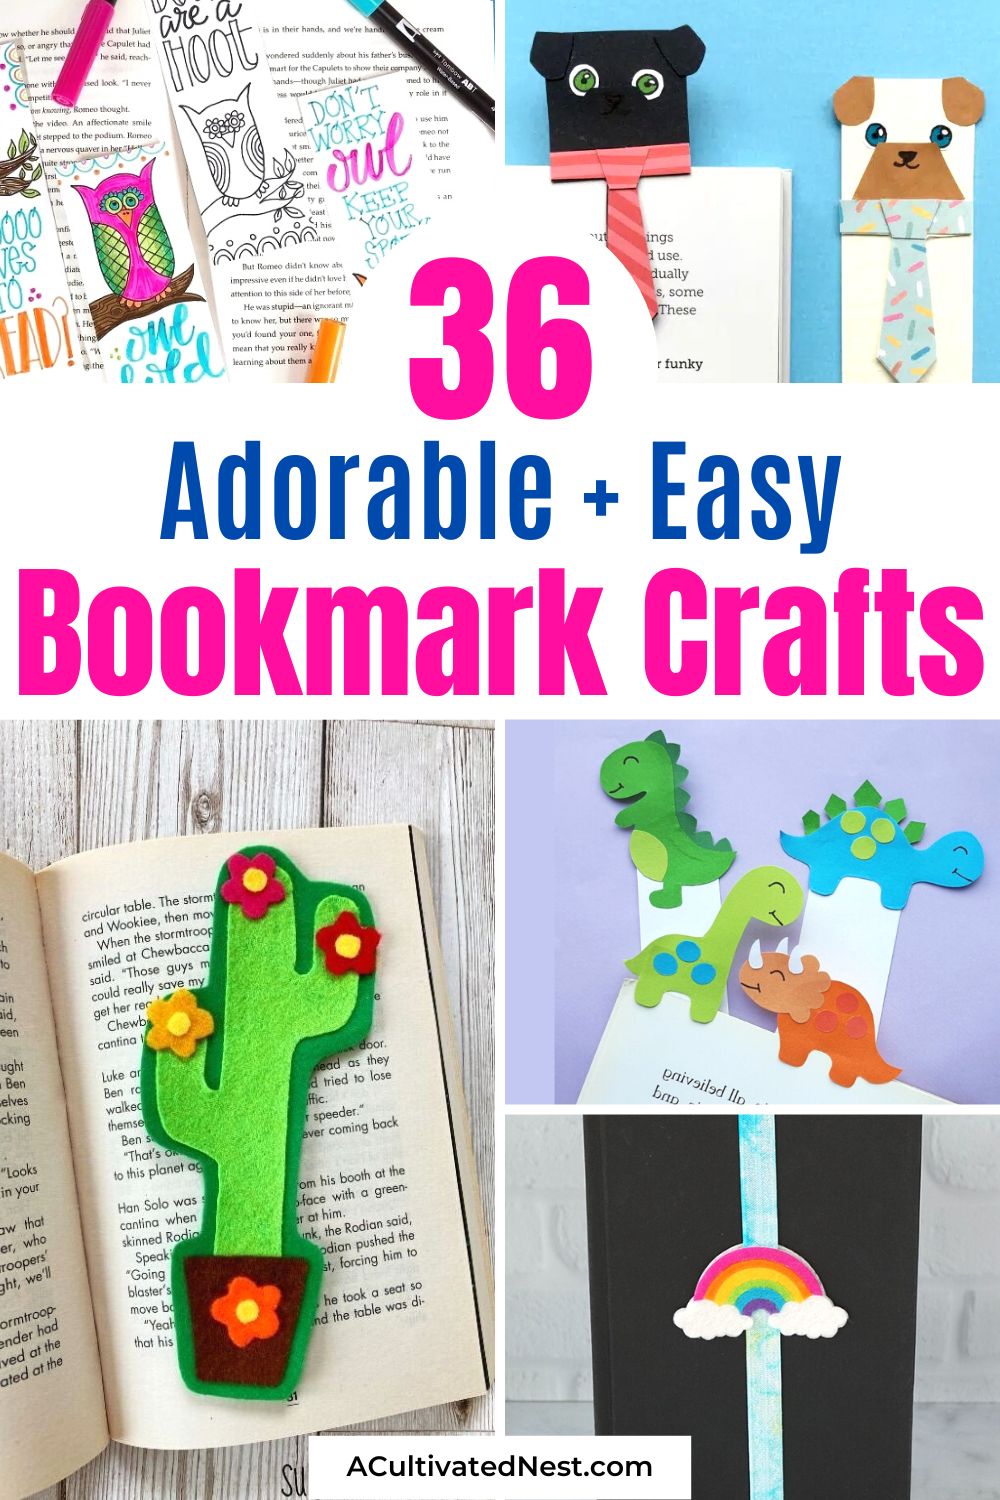 36 Cute Bookmark Crafts- Get ready to add some style to your reading routine with these cute bookmark crafts! With options ranging from colorful paper clips to felt creations, you'll be sure to find a design that speaks to you. | homemade bookmarks, DIY bookmarks, gifts for readers, gifts for book lovers, #crafts #bookmark #DIY #kidsCrafts #ACultivatedNest